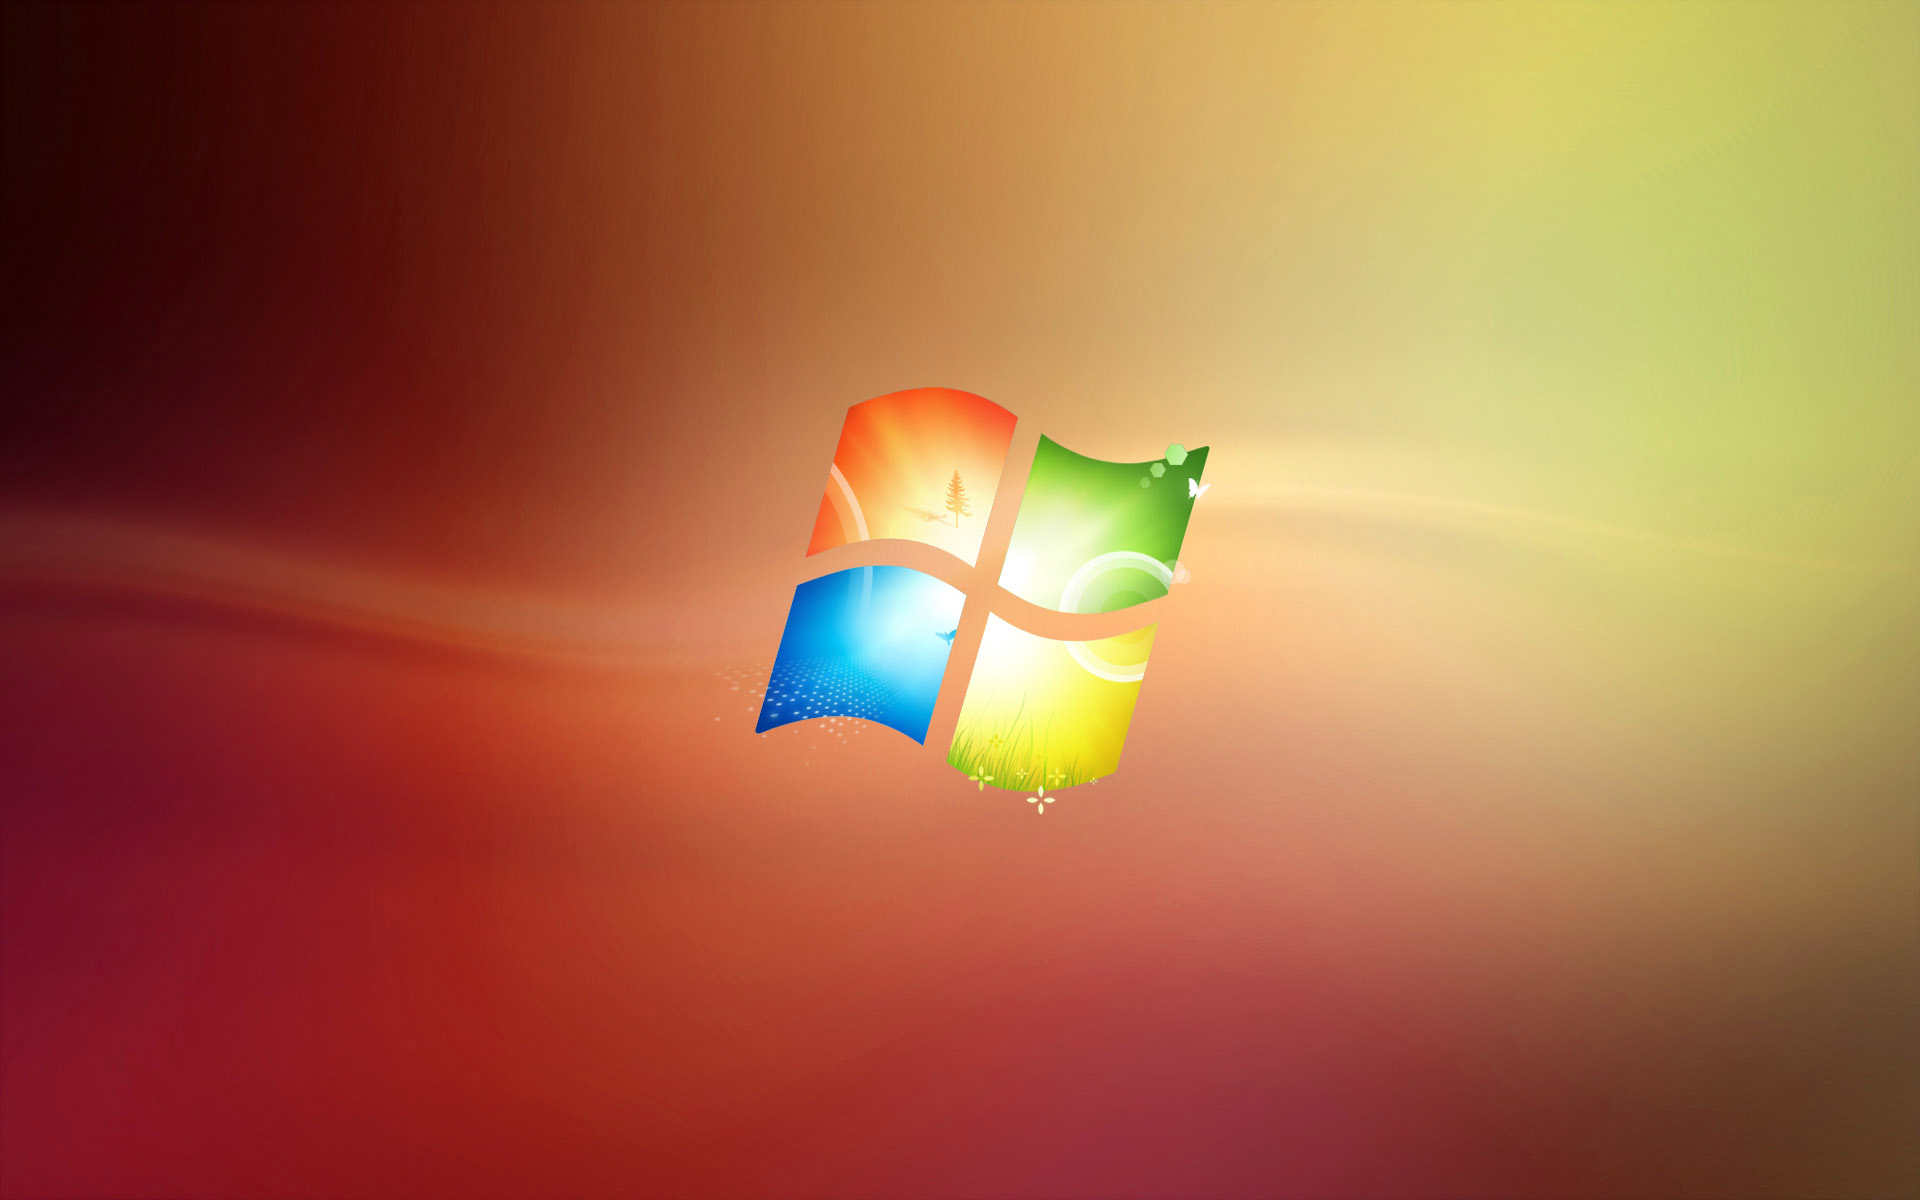 Wallpaper themes for windows 7